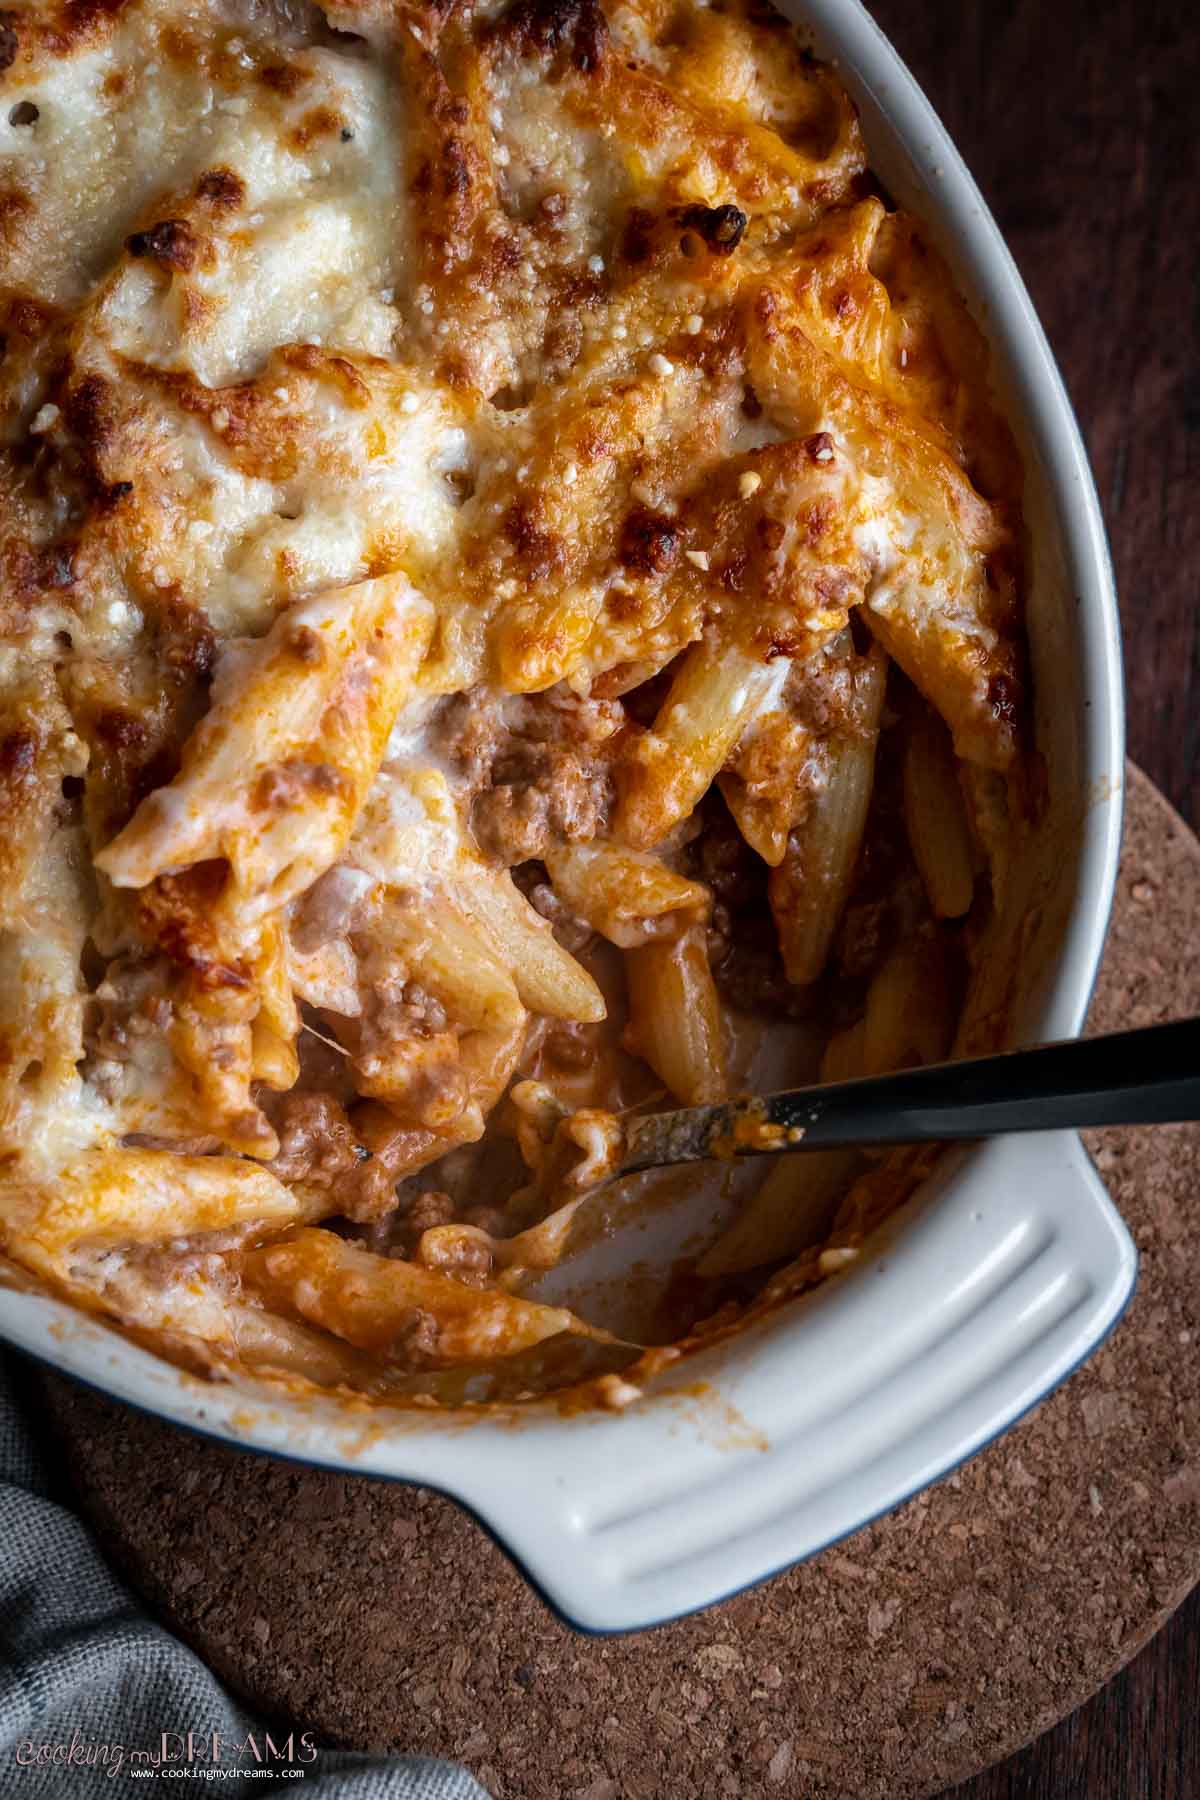 spoon taking out a portion of baked pasta from a casserole